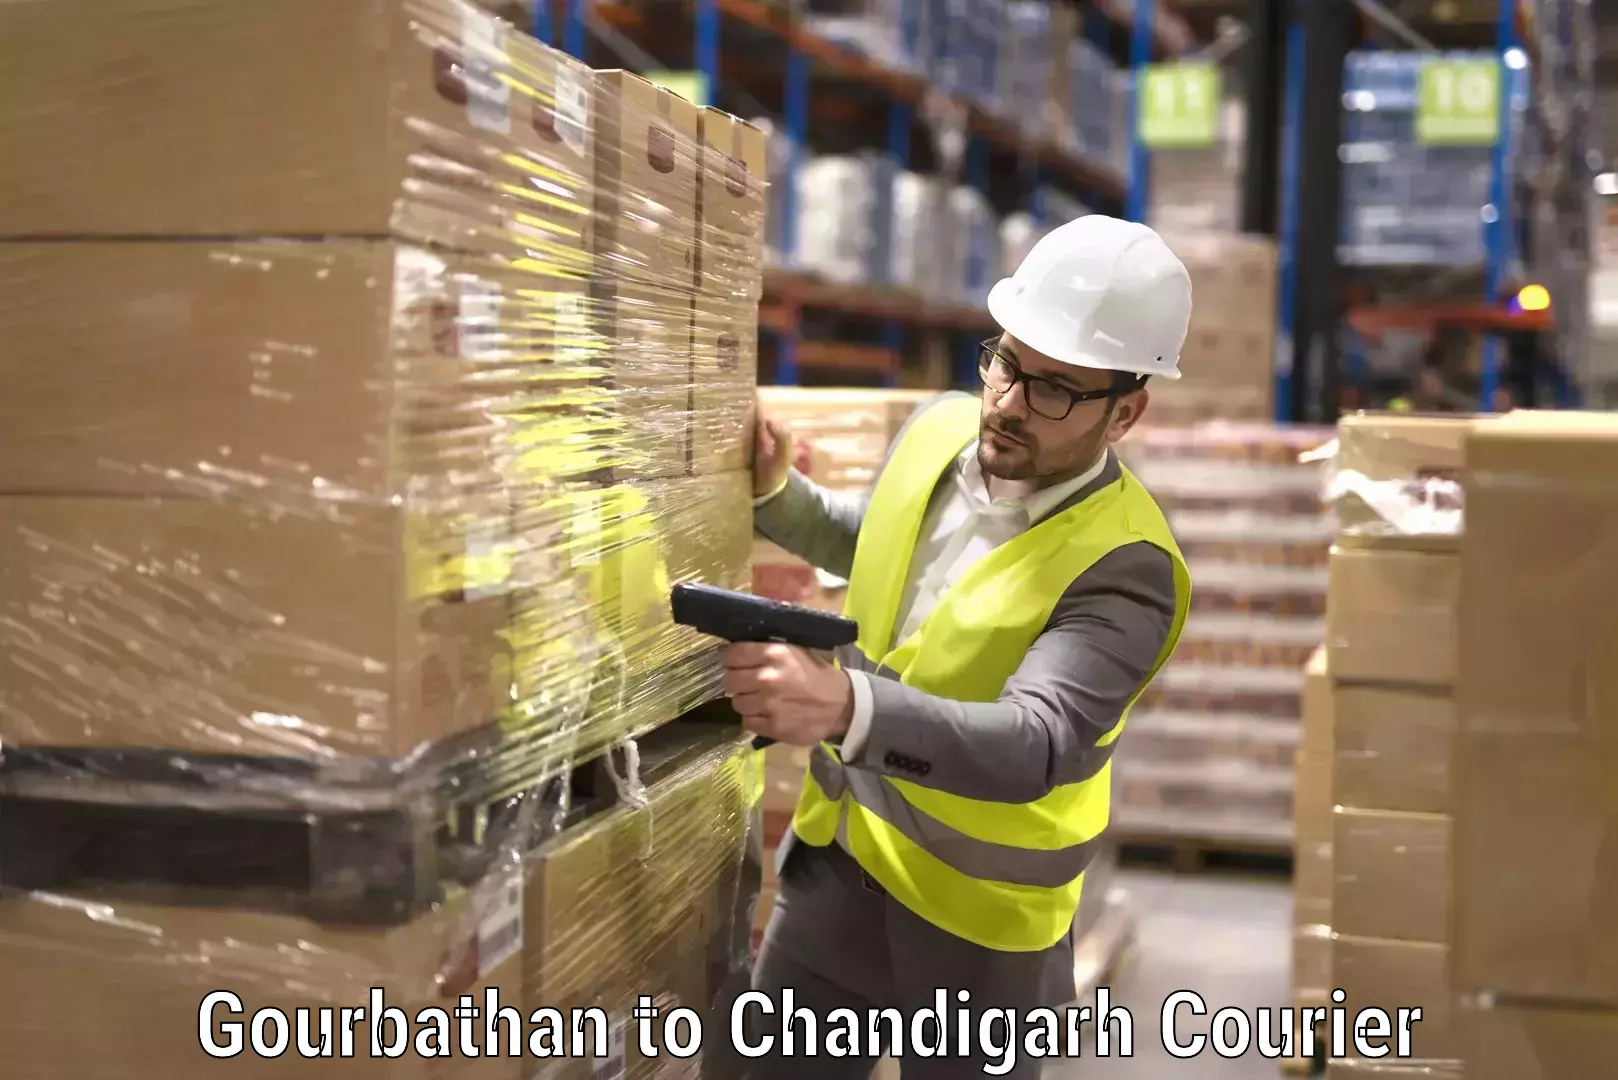 Expert goods movers Gourbathan to Chandigarh